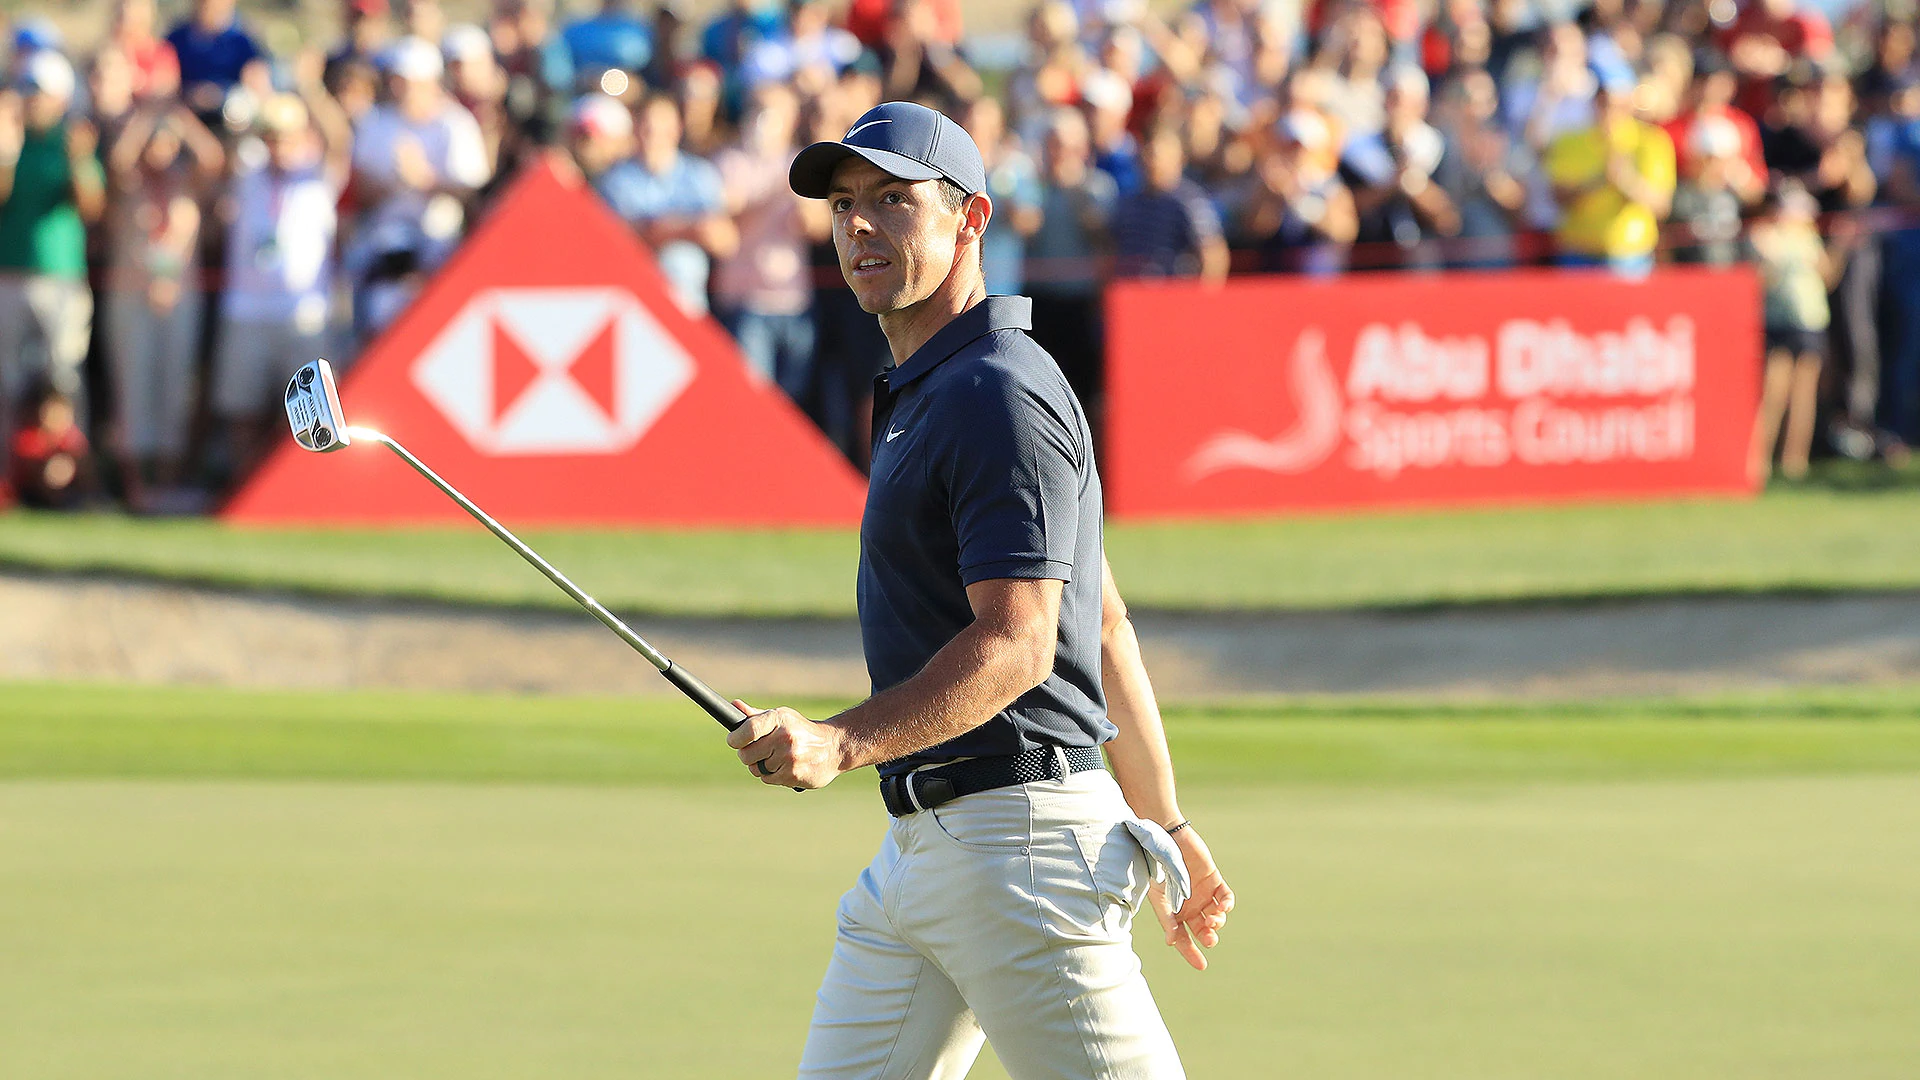 Closing eagle moves Rory within 3 in Abu Dhabi